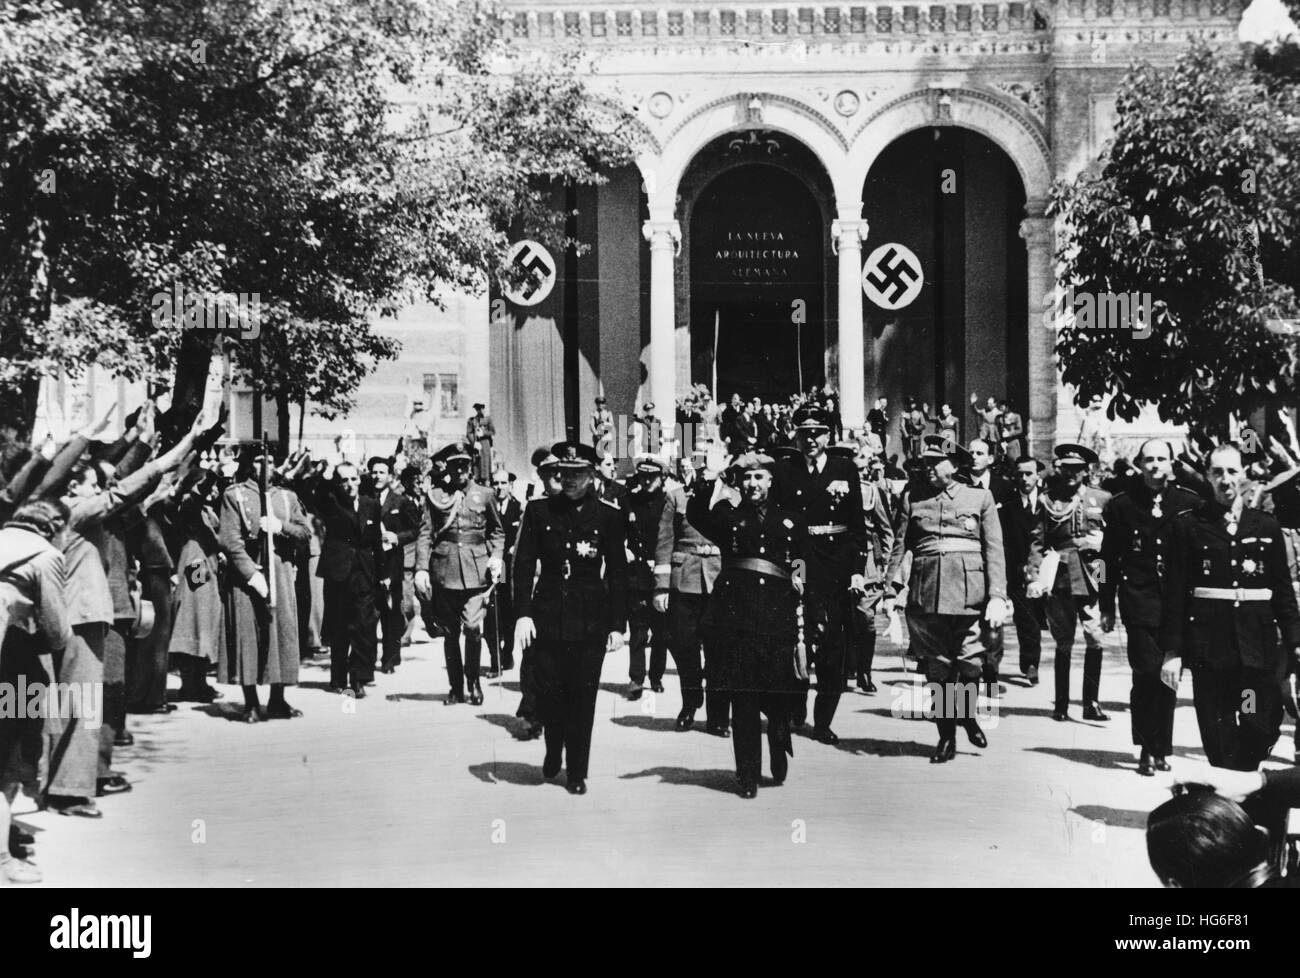 The Nazi propaganda picture shows the Spanish dictator Francisco Franco (front row right) doing the Nazi salute and the Spanish minster Ramon Serrano Suner (front row left) after the exhibition opening of the 'Neue Deutsche Architektur' (New German Architecture) in Madrid, Spain, May 1942. Fotoarchiv für Zeitgeschichtee - NO WIRE SERVIVE - | usage worldwide Stock Photo